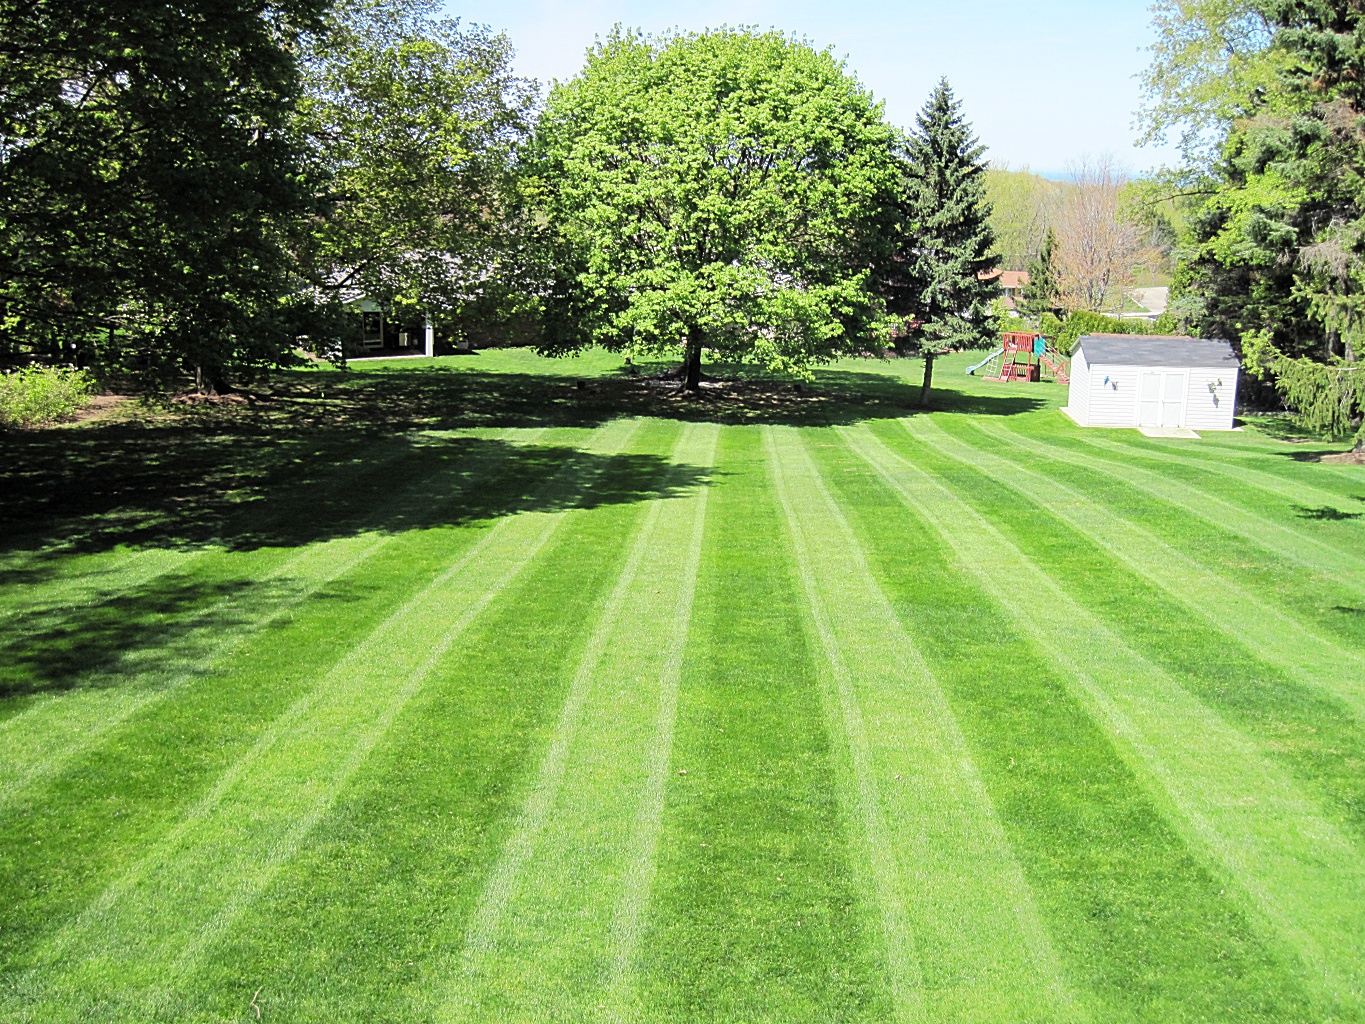 Treating Lawn Fungus for a Healthy Lawn